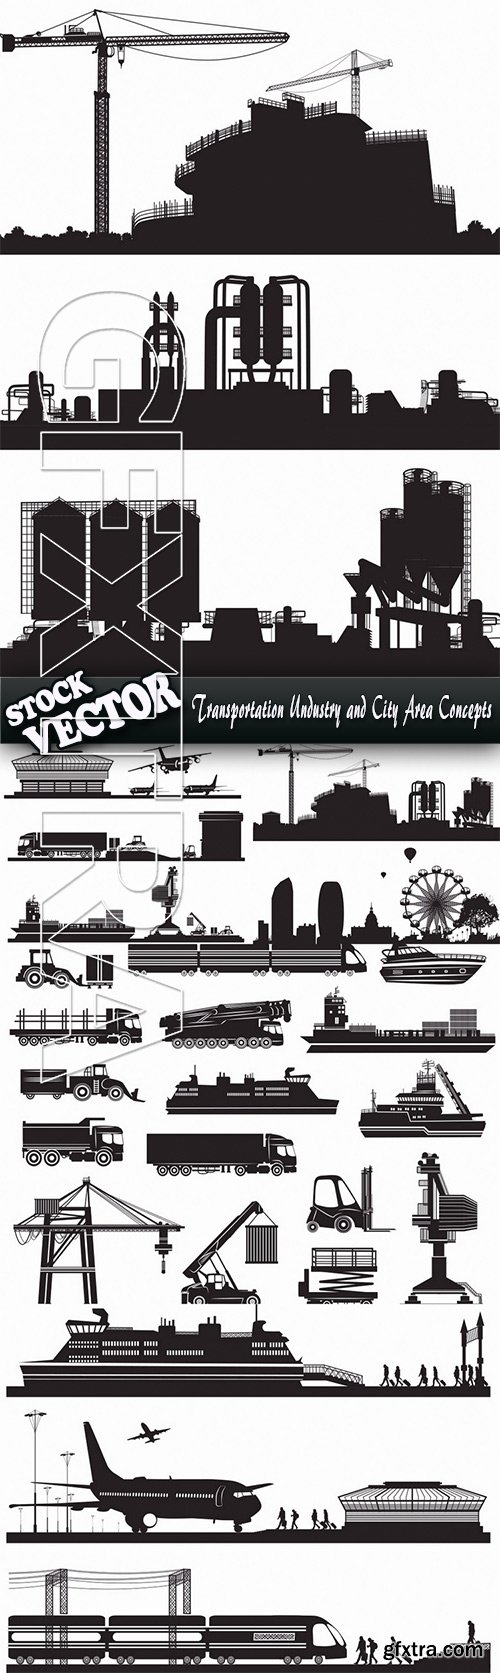 Stock Vector - Transportation Undustry and City Area Concepts